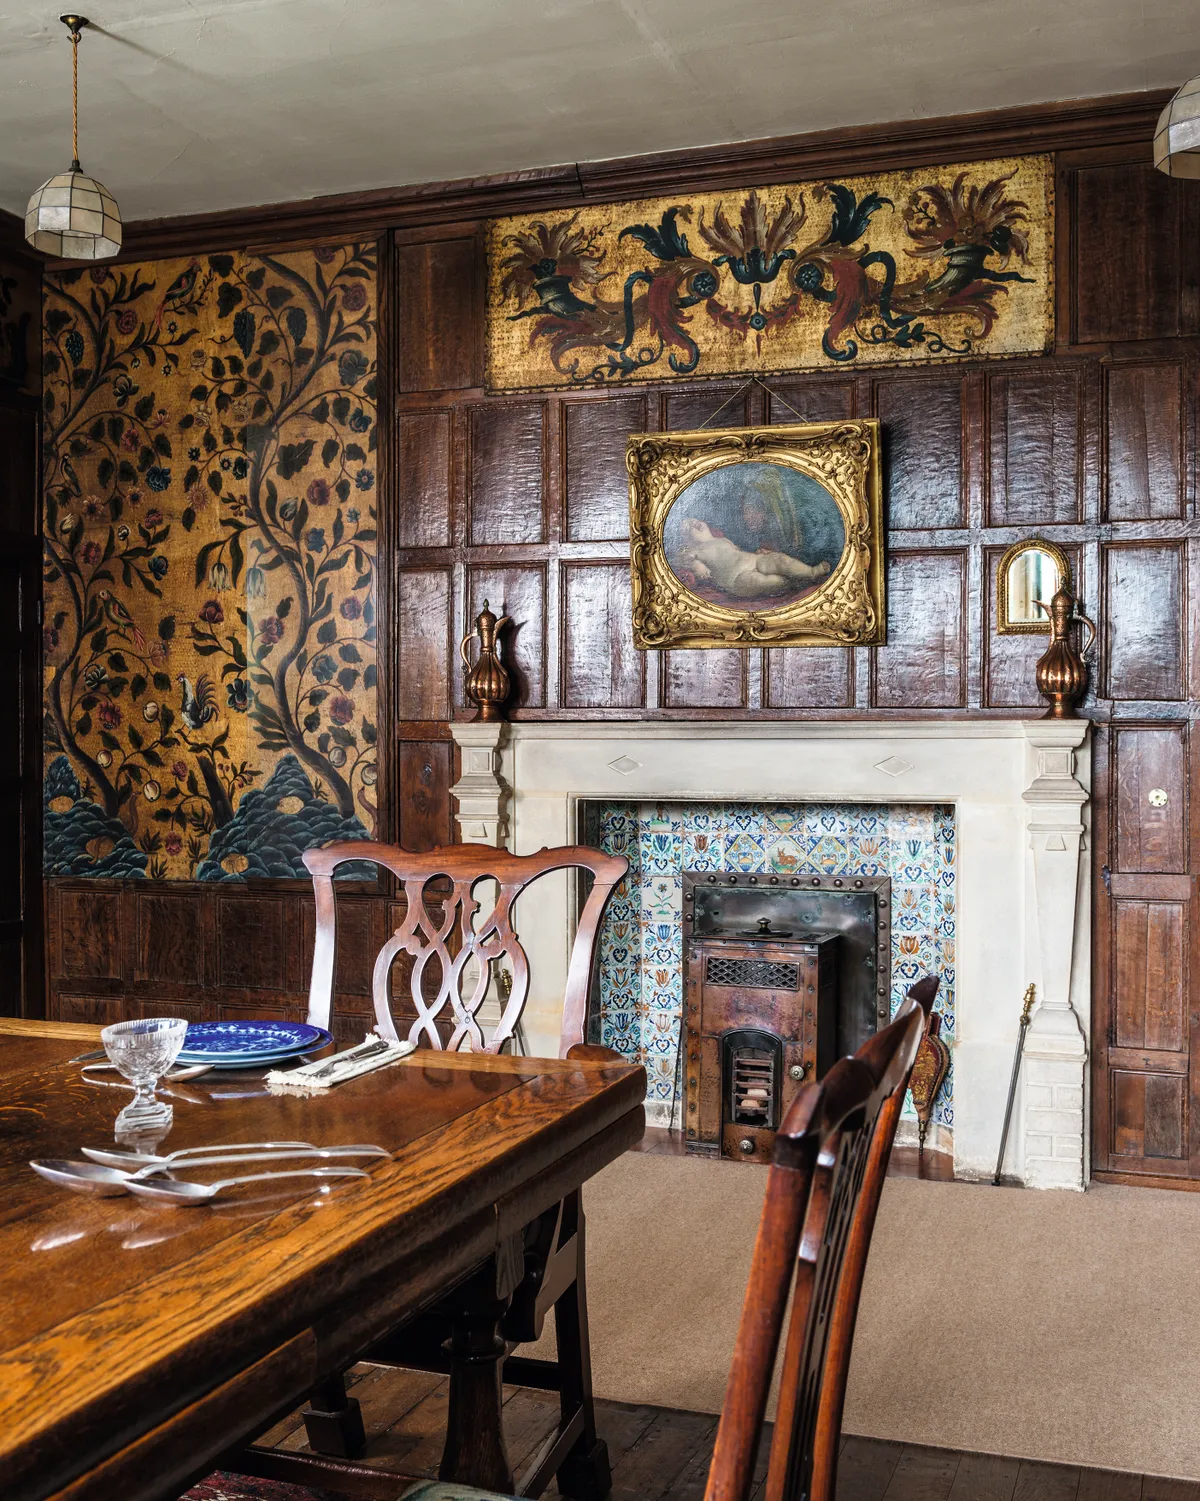 Rudyard Kipling's Sussex house fireplace in the dining room